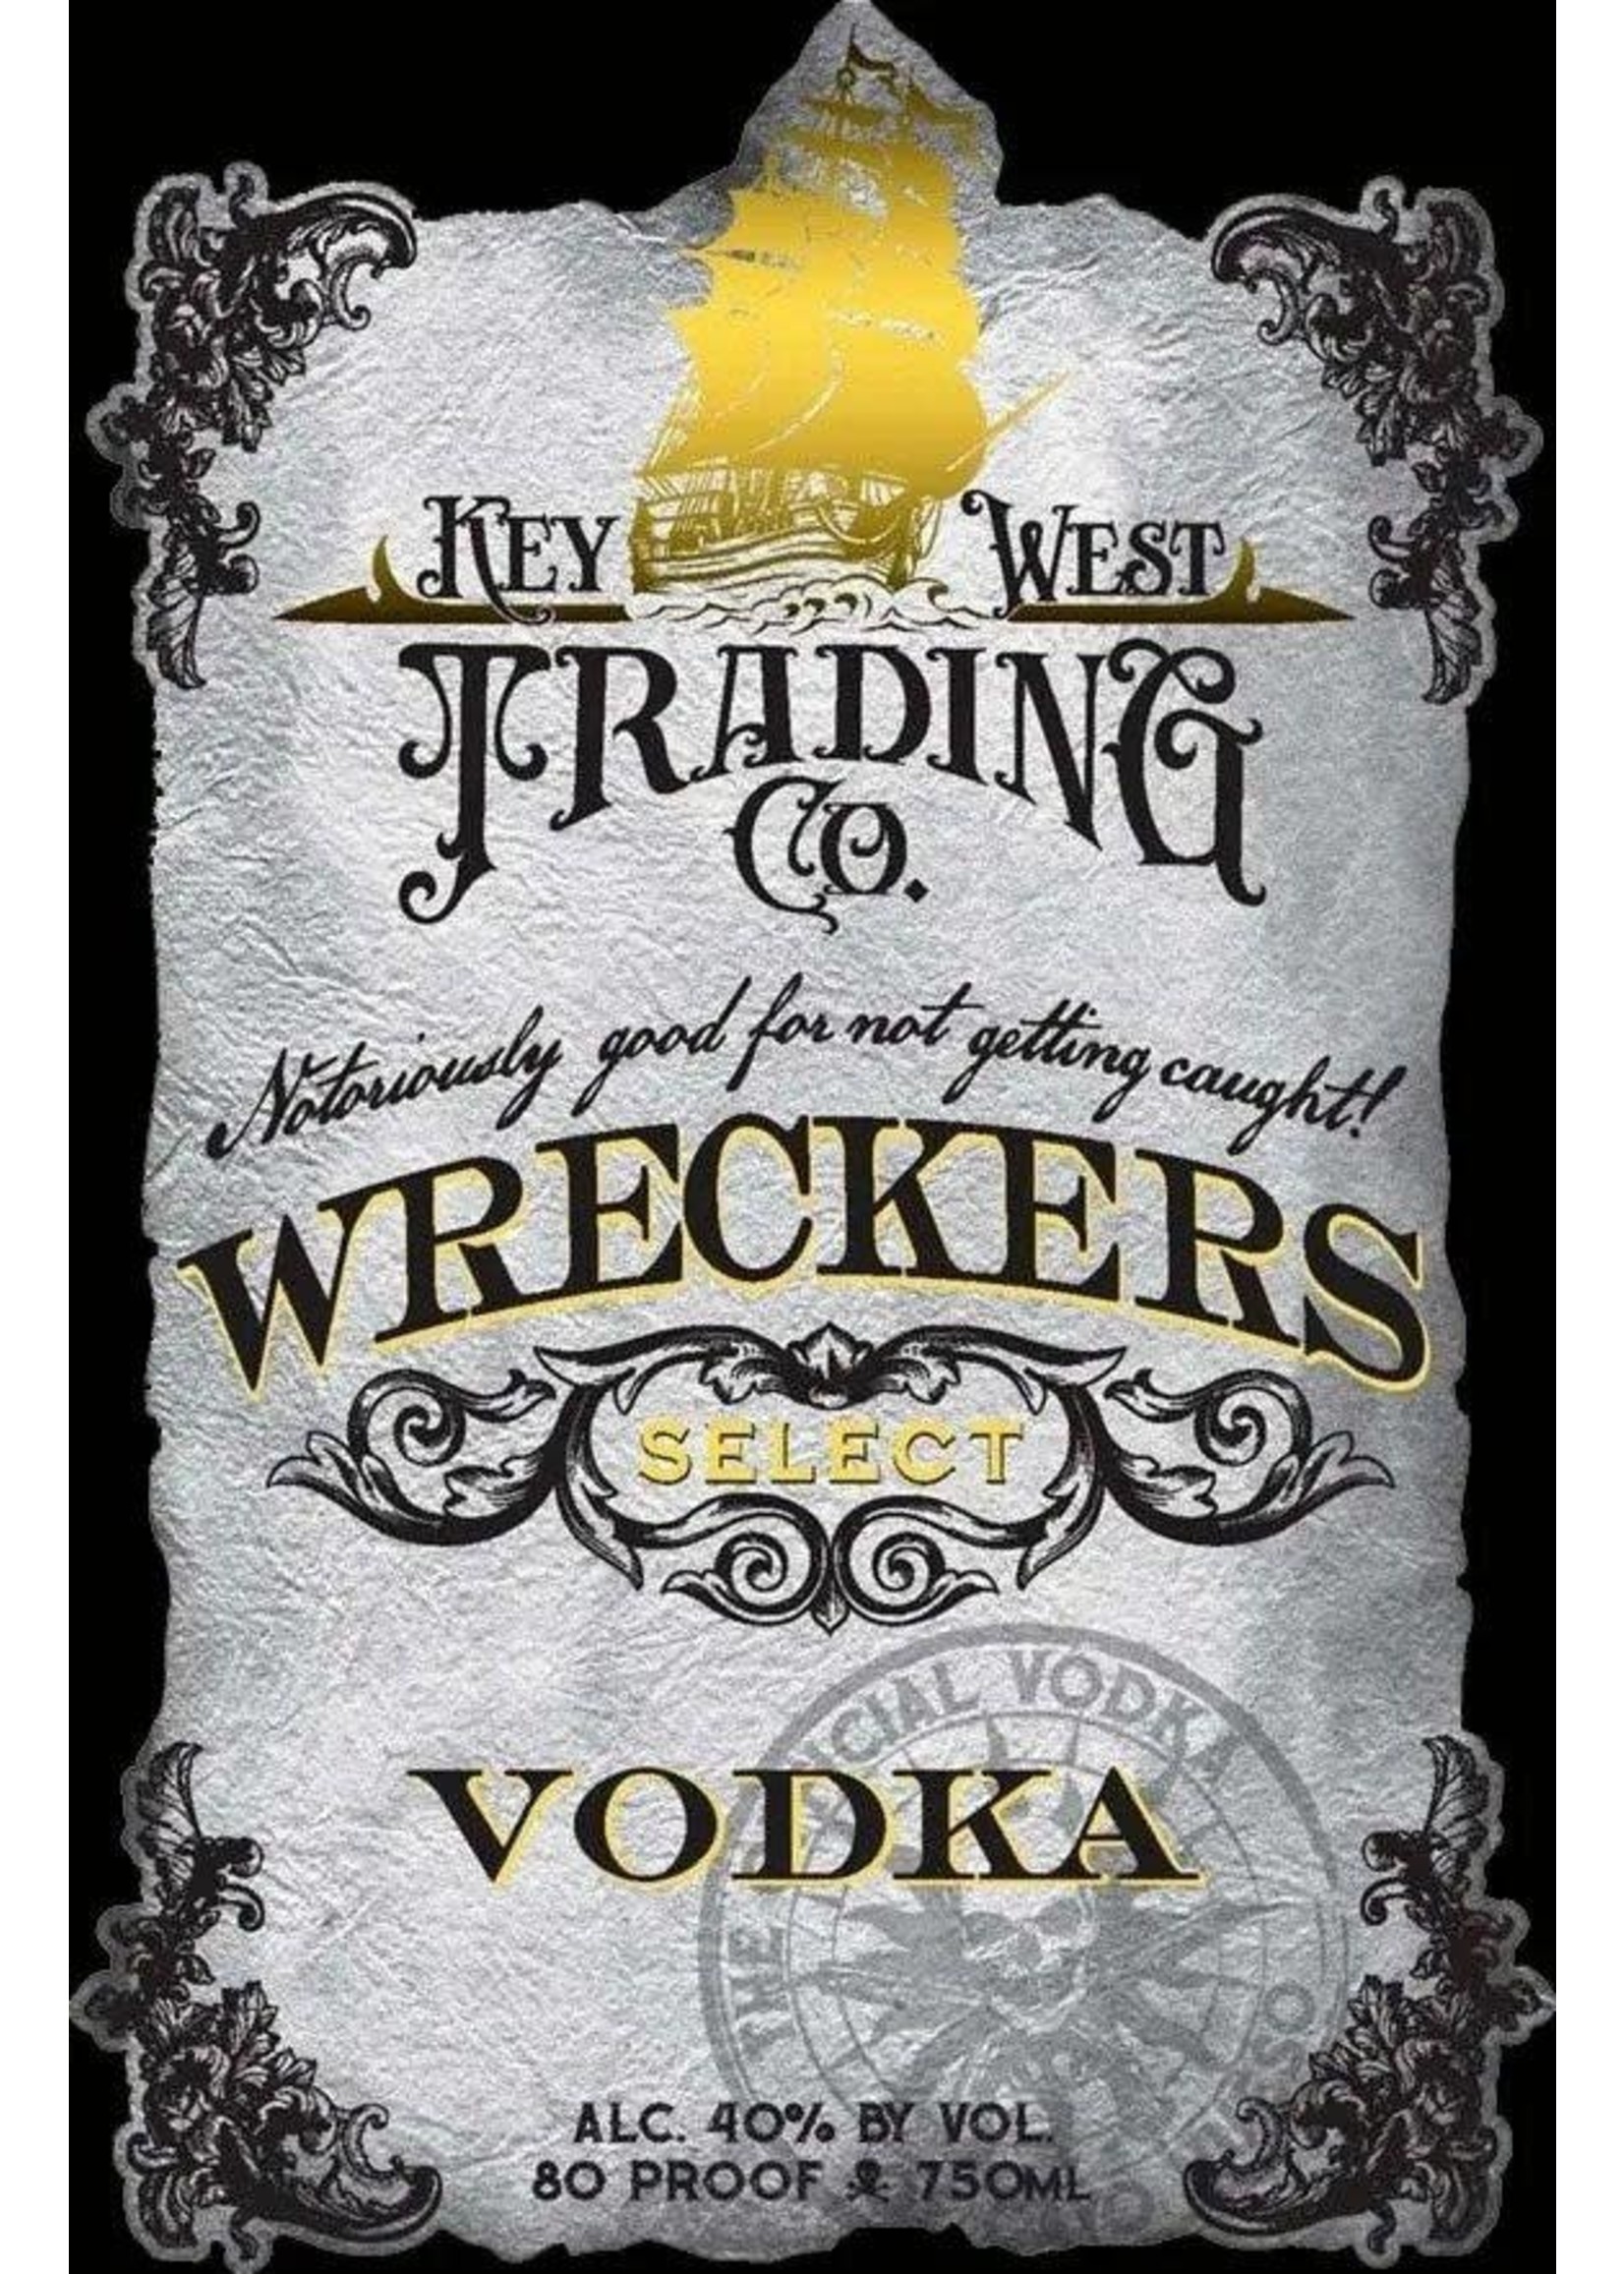 KEY WEST TRADING CO. KEY WEST TRADING CO.	WRECKERS VOKDA	.050L